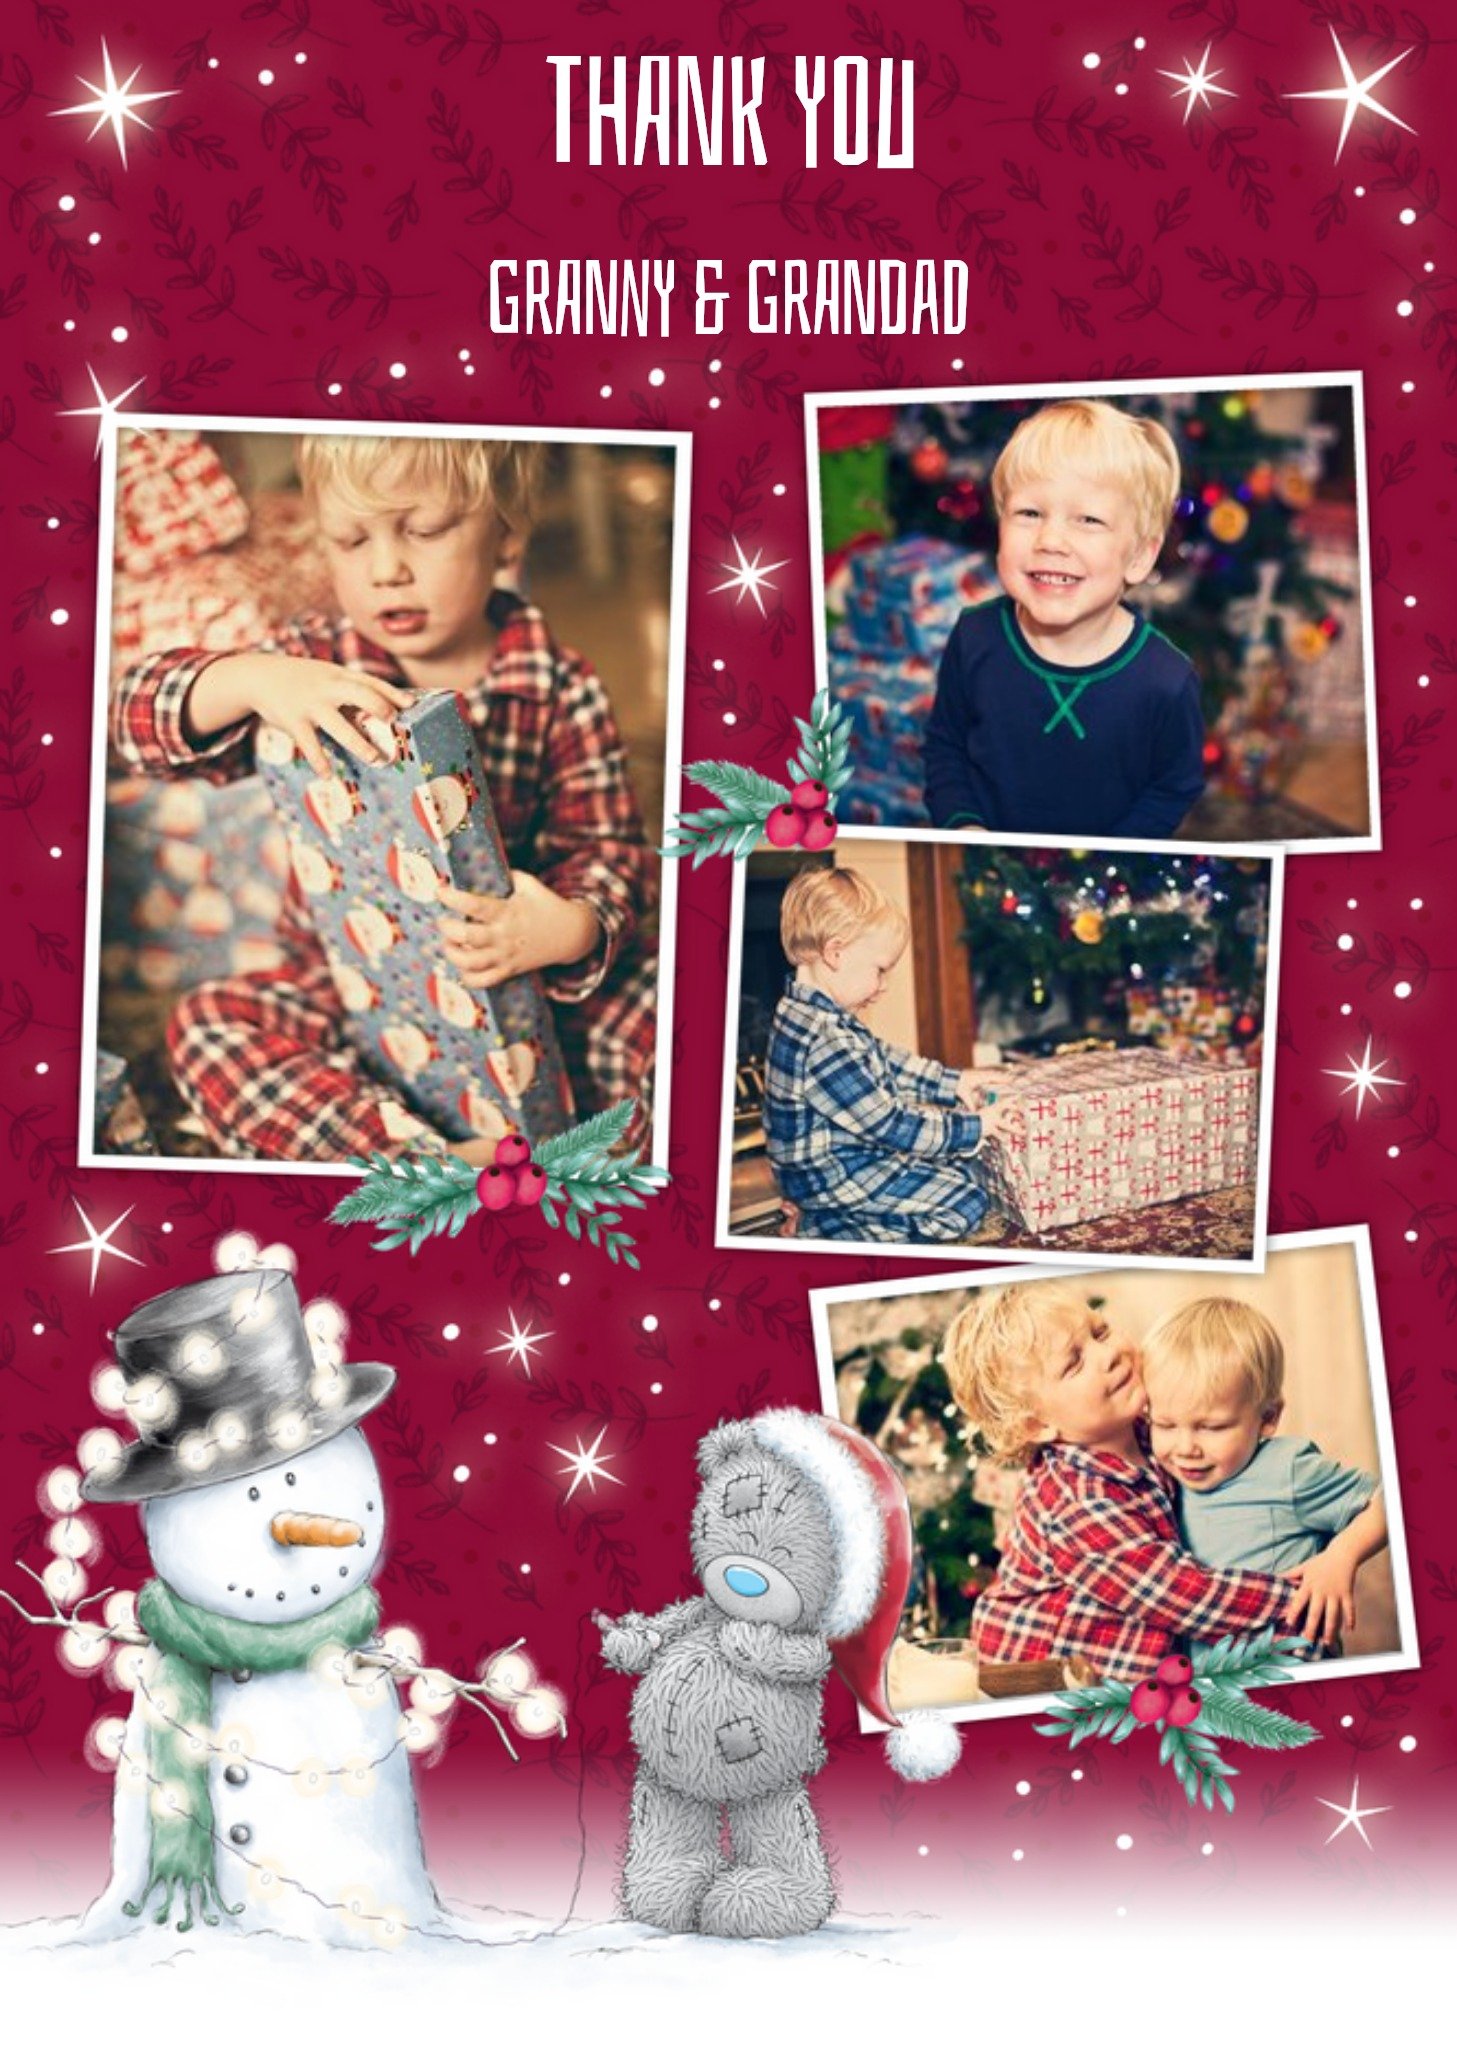 Me To You Tatty Teddy Christmas Thank You Photo Upload Card For Granny & Grandad, Large